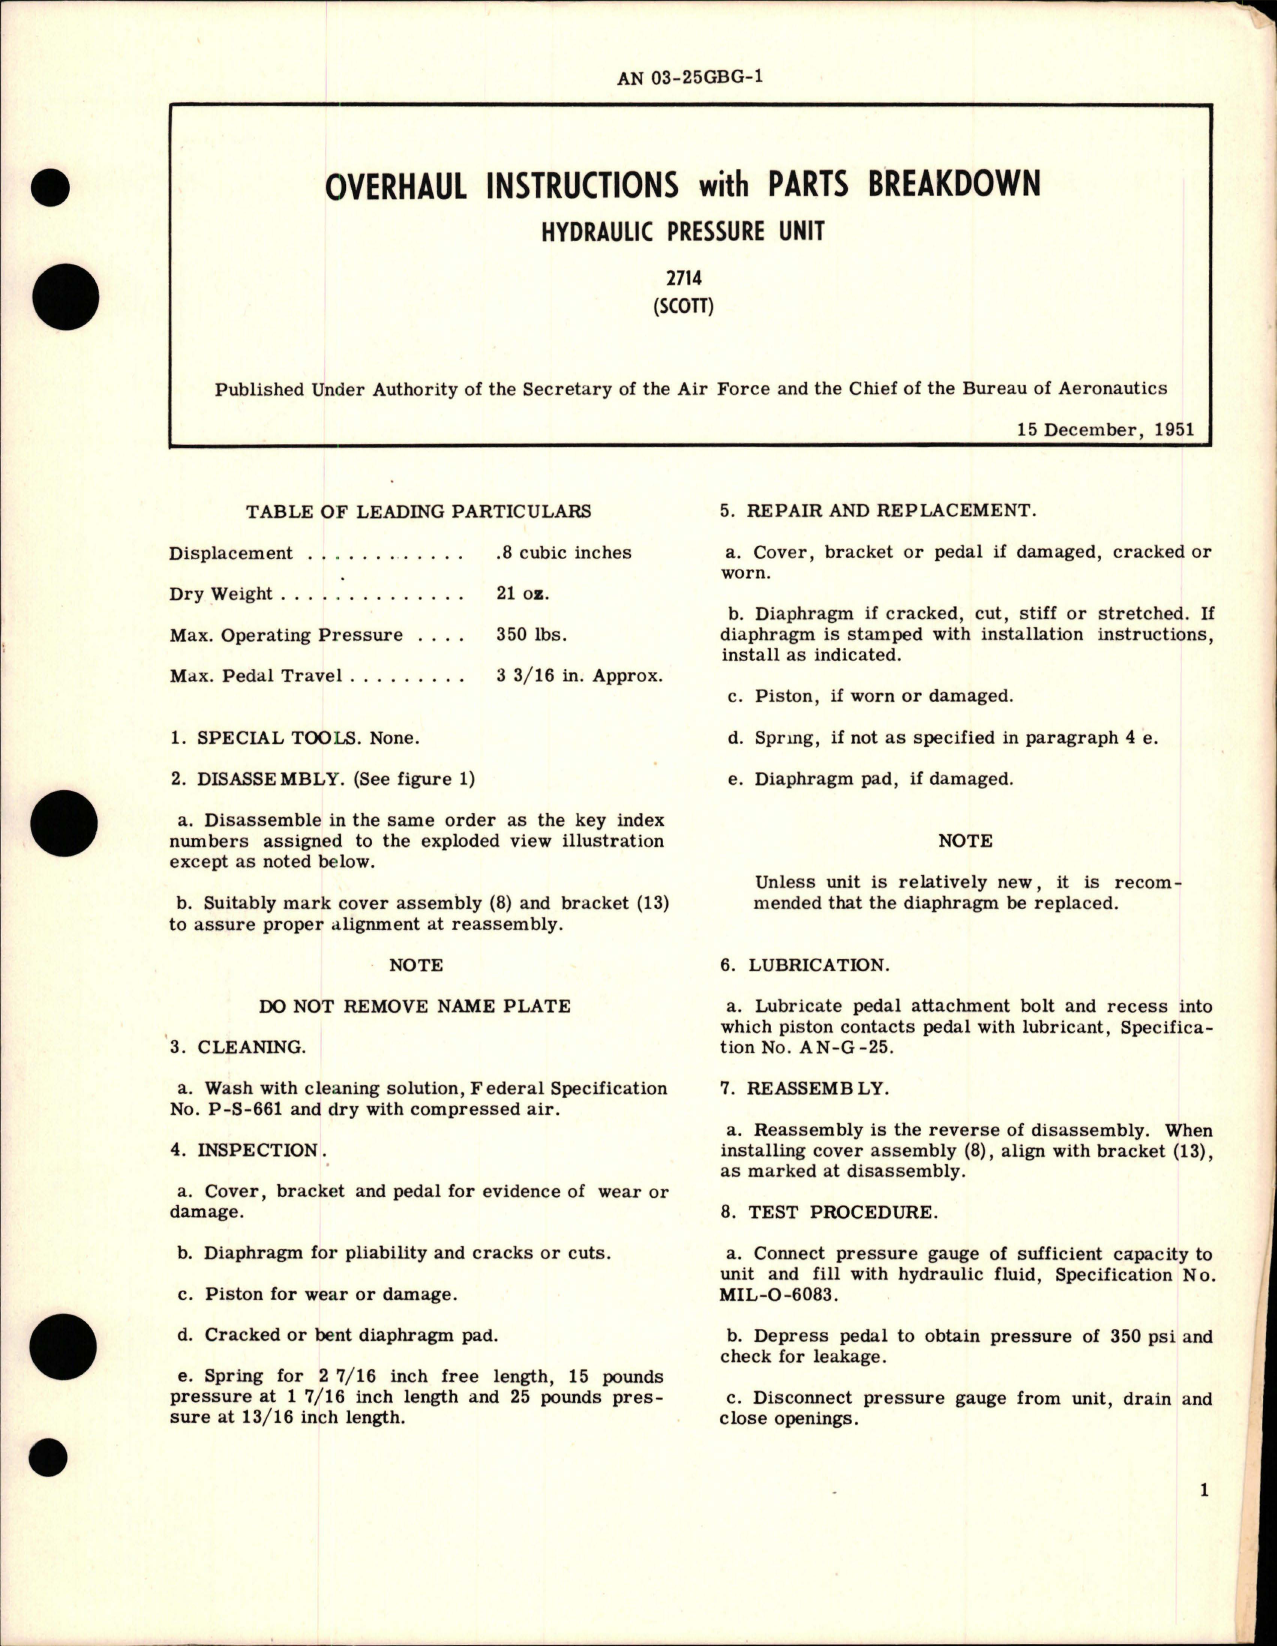 Sample page 1 from AirCorps Library document: Overhaul Instructions with Parts Breakdown for Hydraulic Pressure Unit - 2714